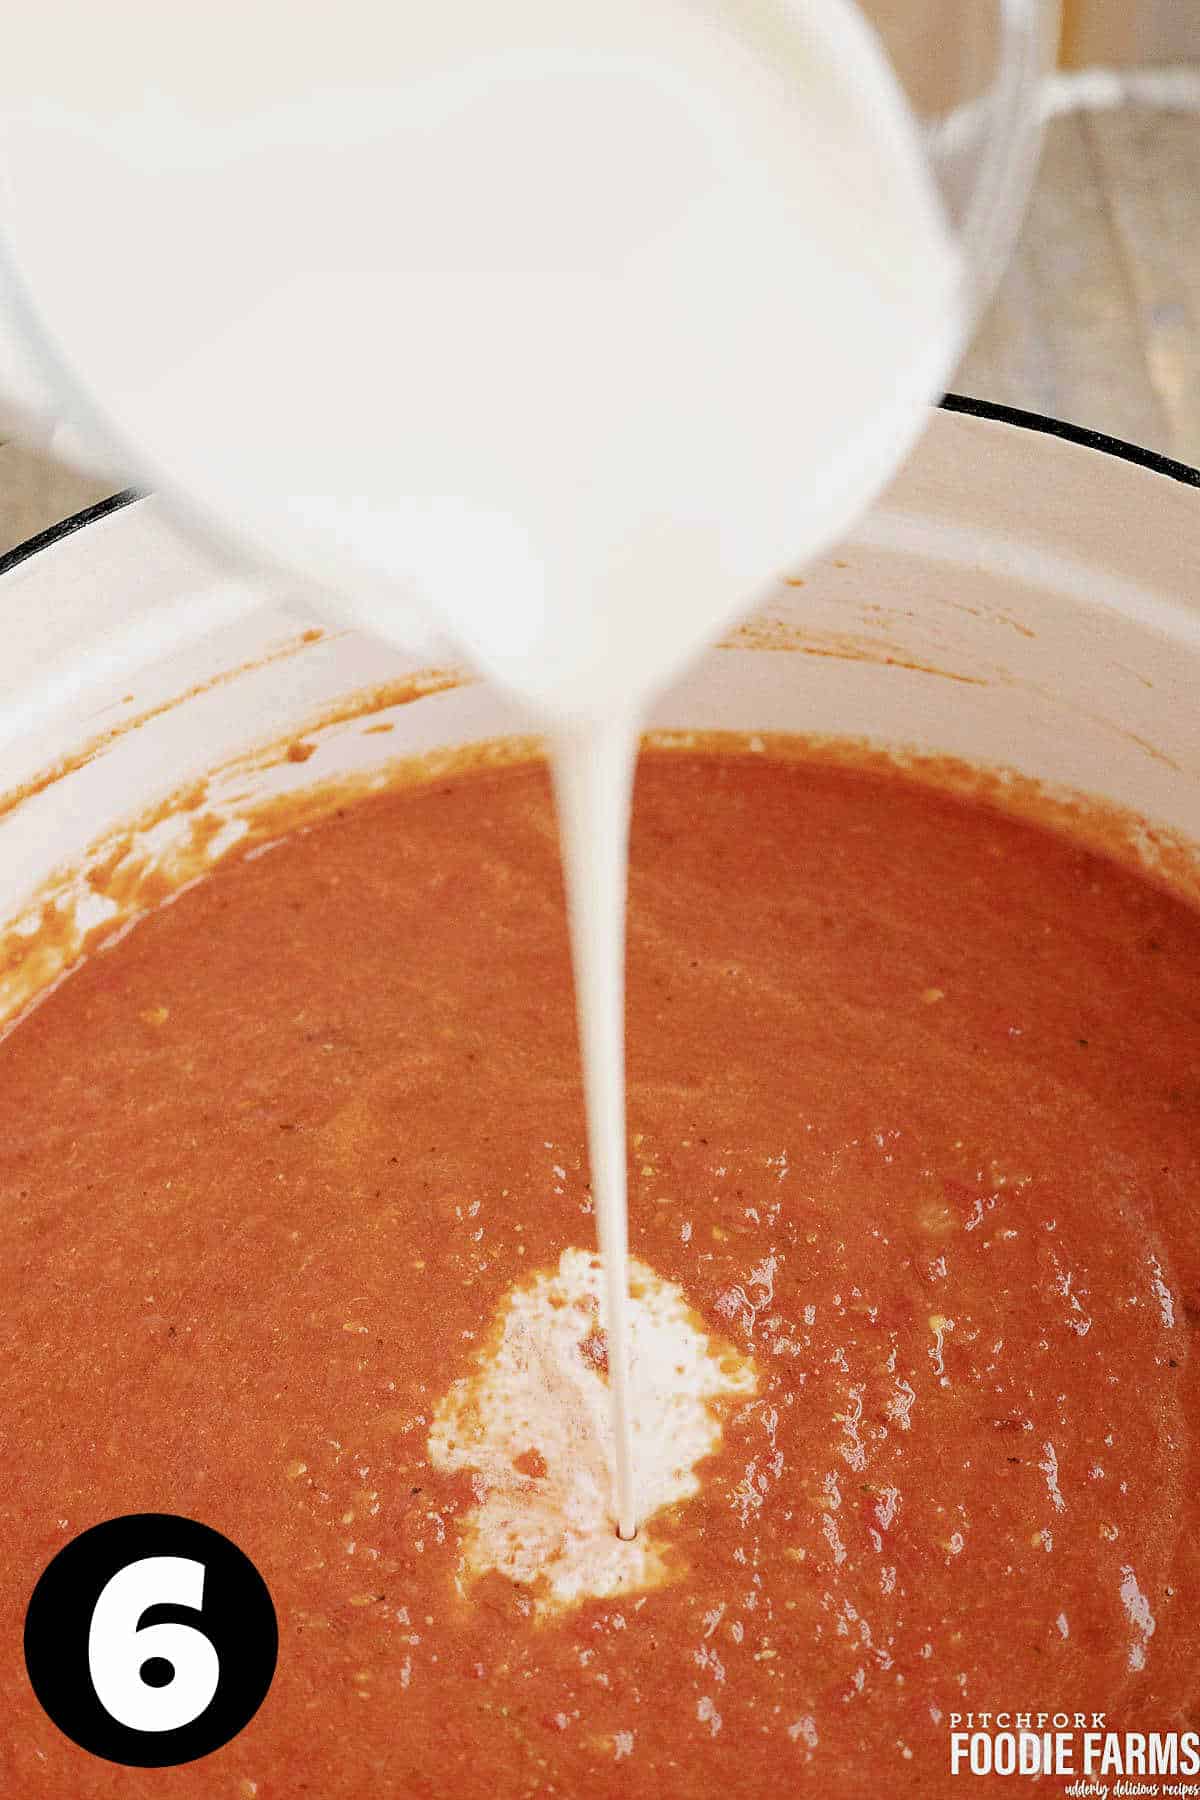 Cream being poured into a pot of creamy tomato soup.